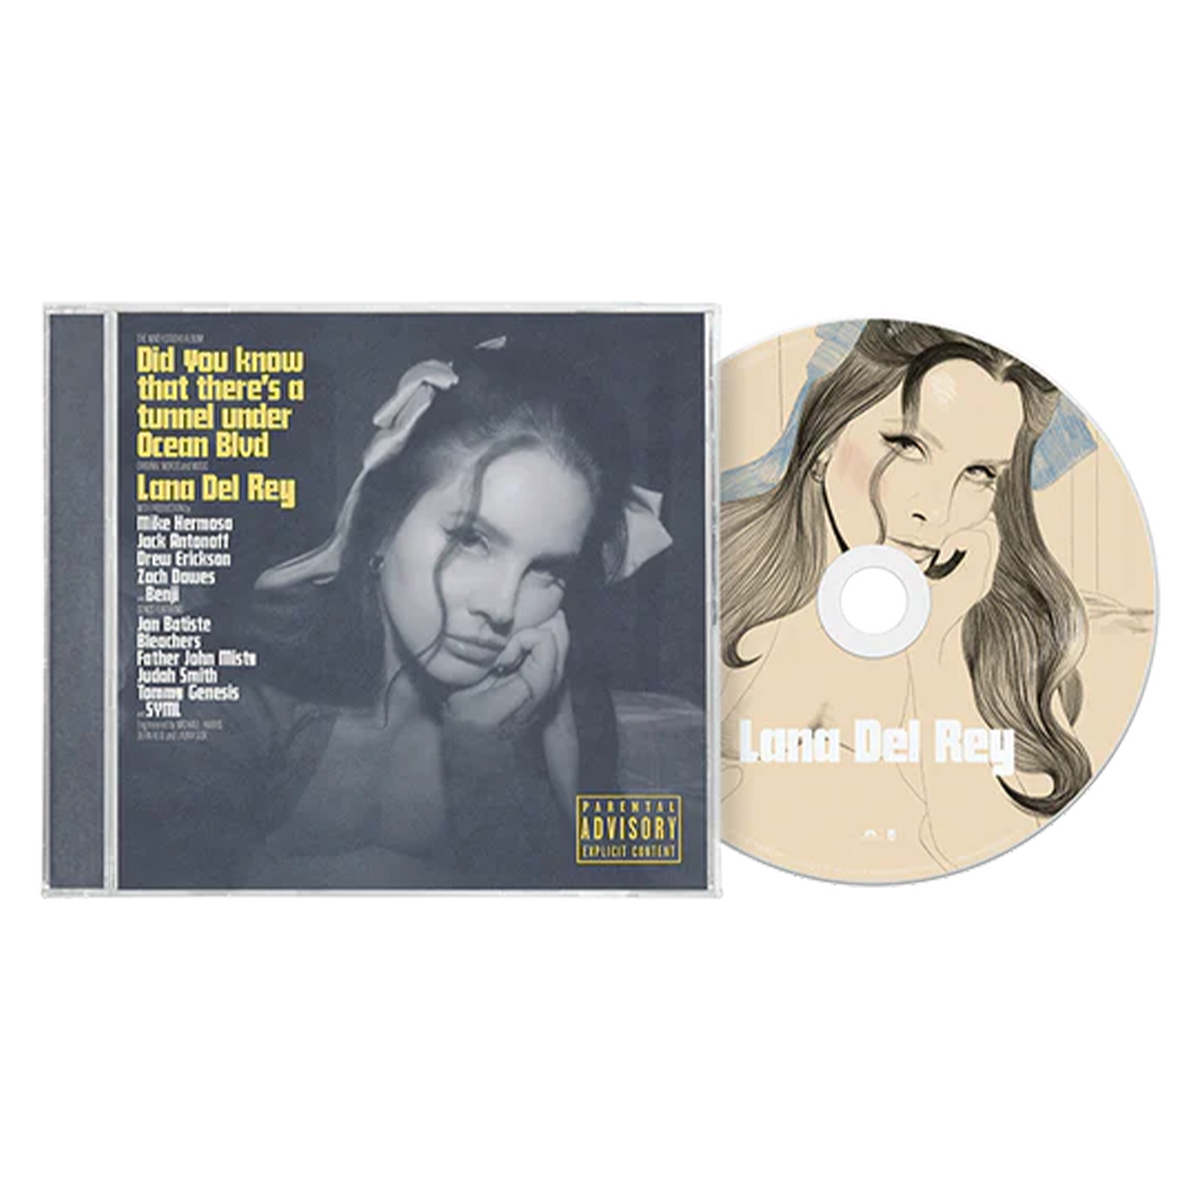 Lana Del Rey - Did you know that there's a tunnel under Ocean Blvd: CD